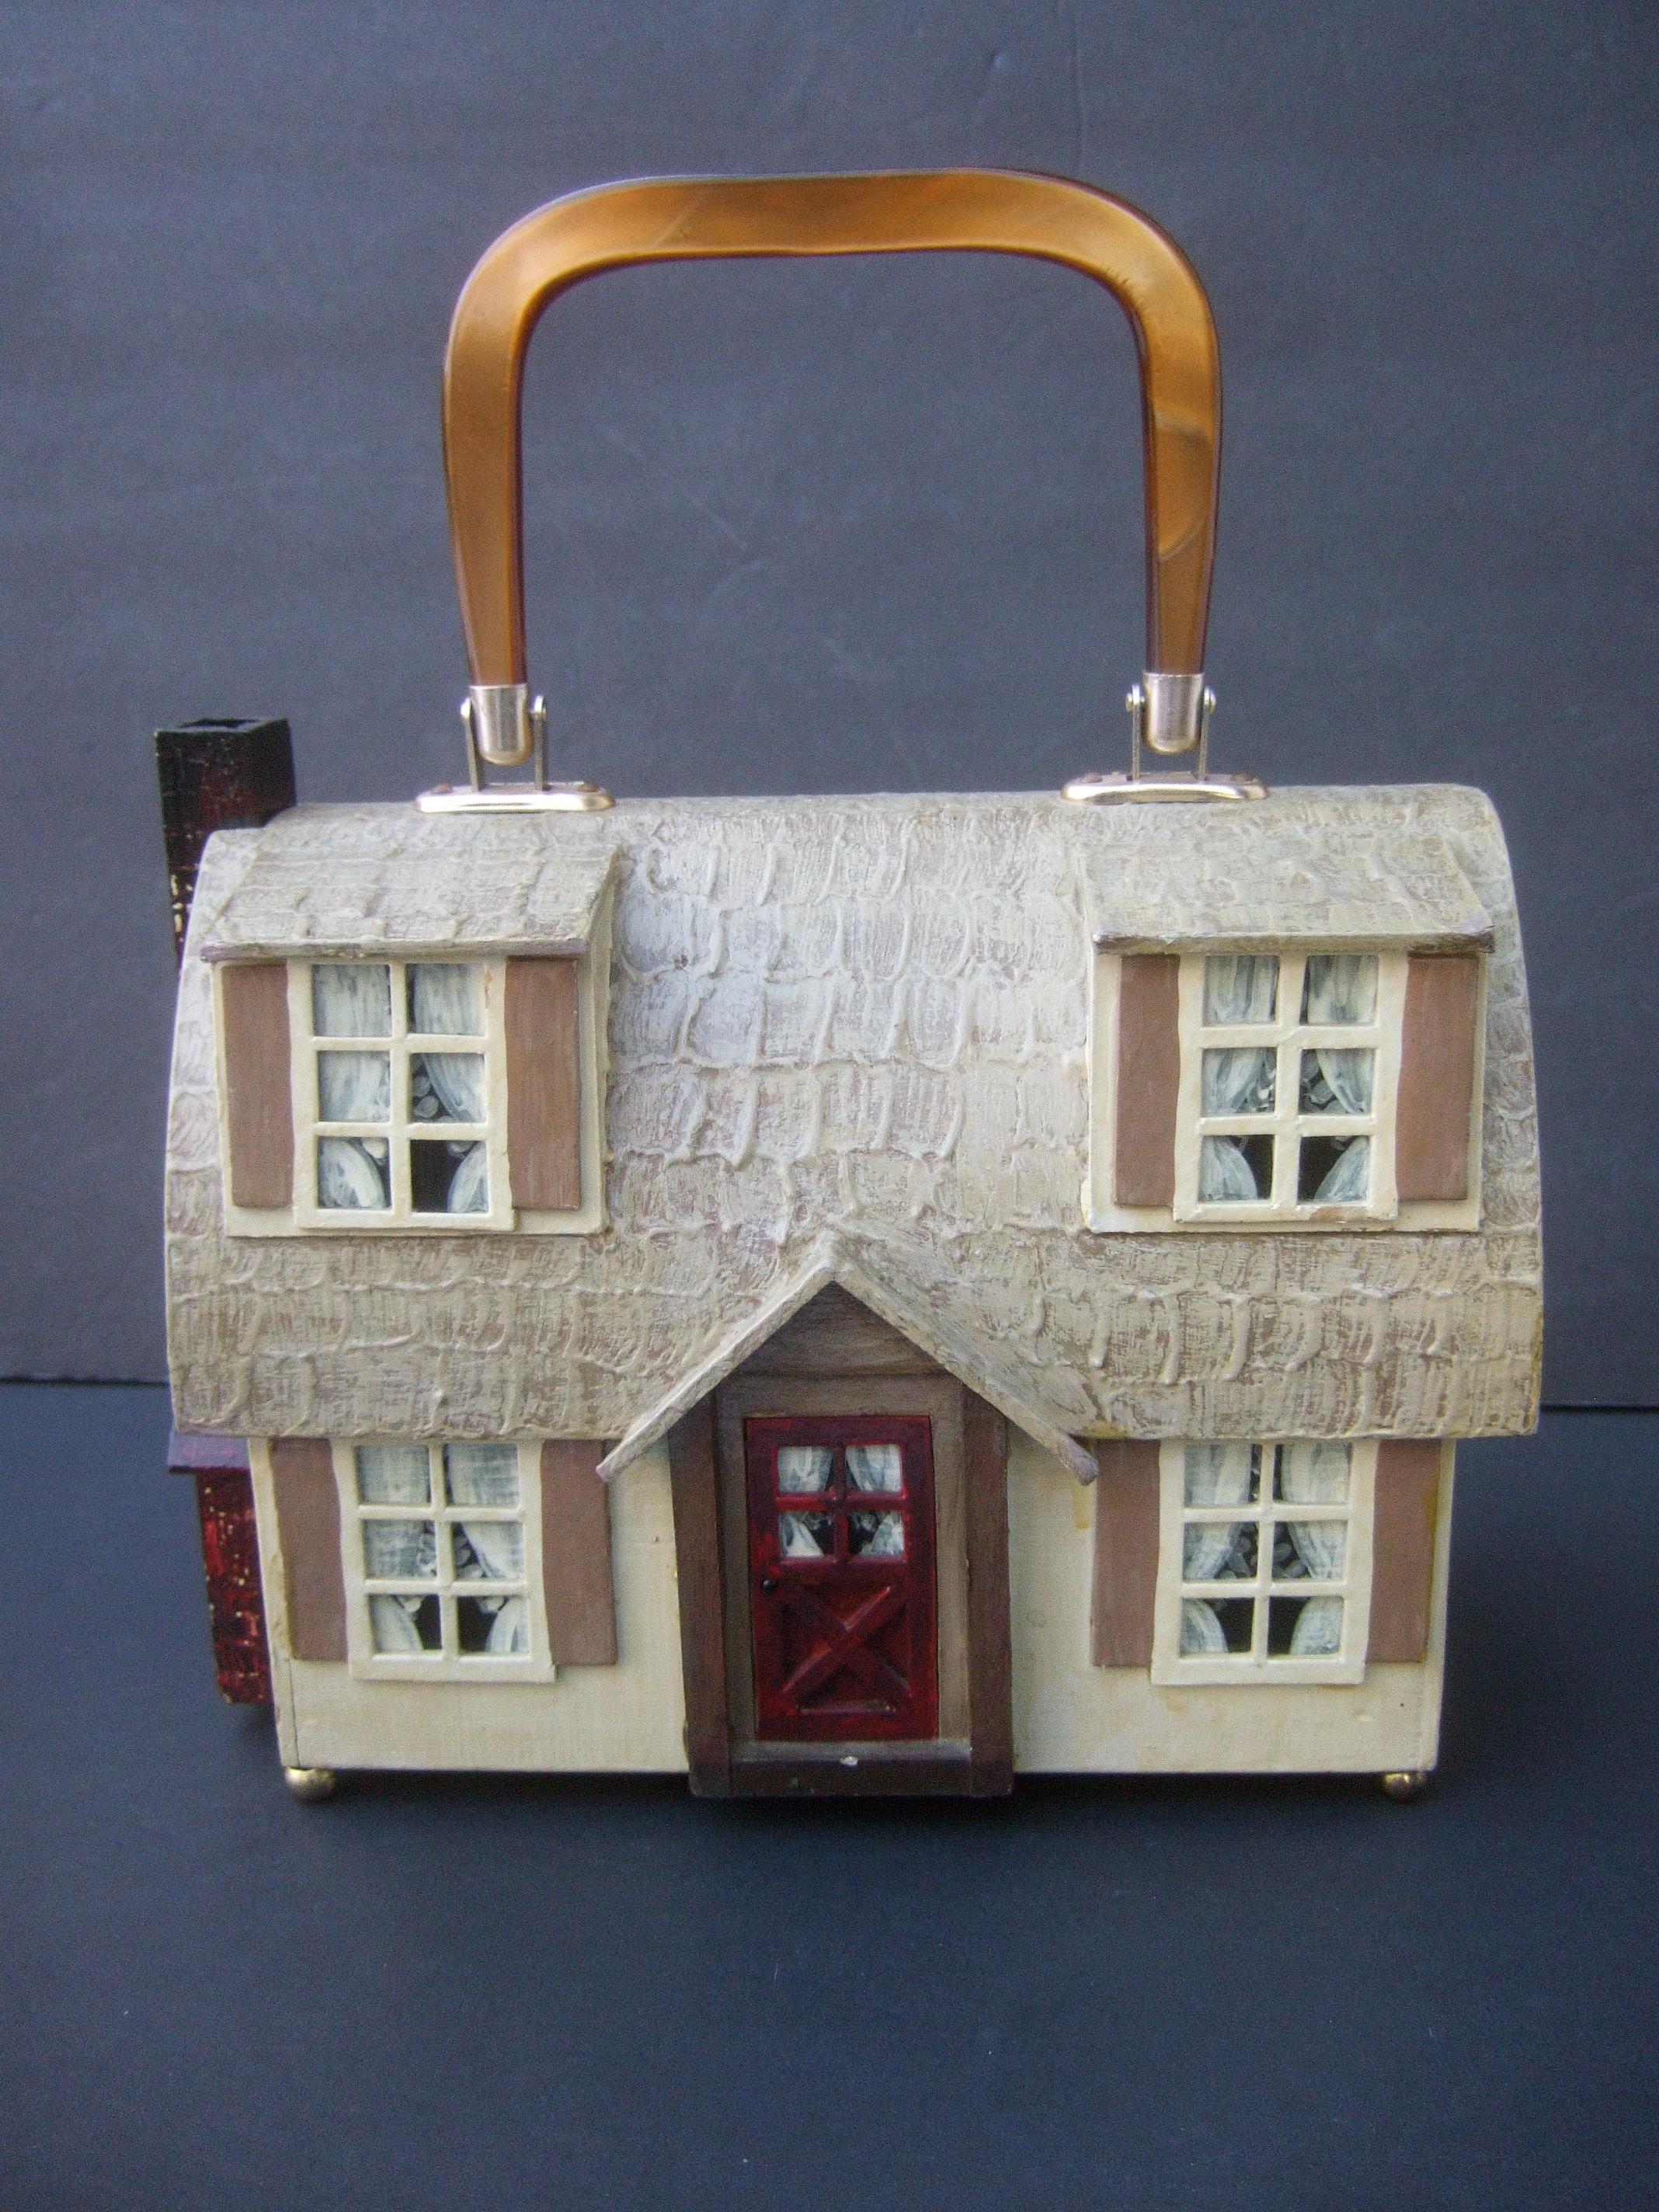 Whimsical wood enamel handmade artisan house design handbag c 1970s
The unique quirky vintage box purse is designed with a charming cottage style home
Decorated with a textured enamel roof that emulates shingles; accented with handpainted enamel